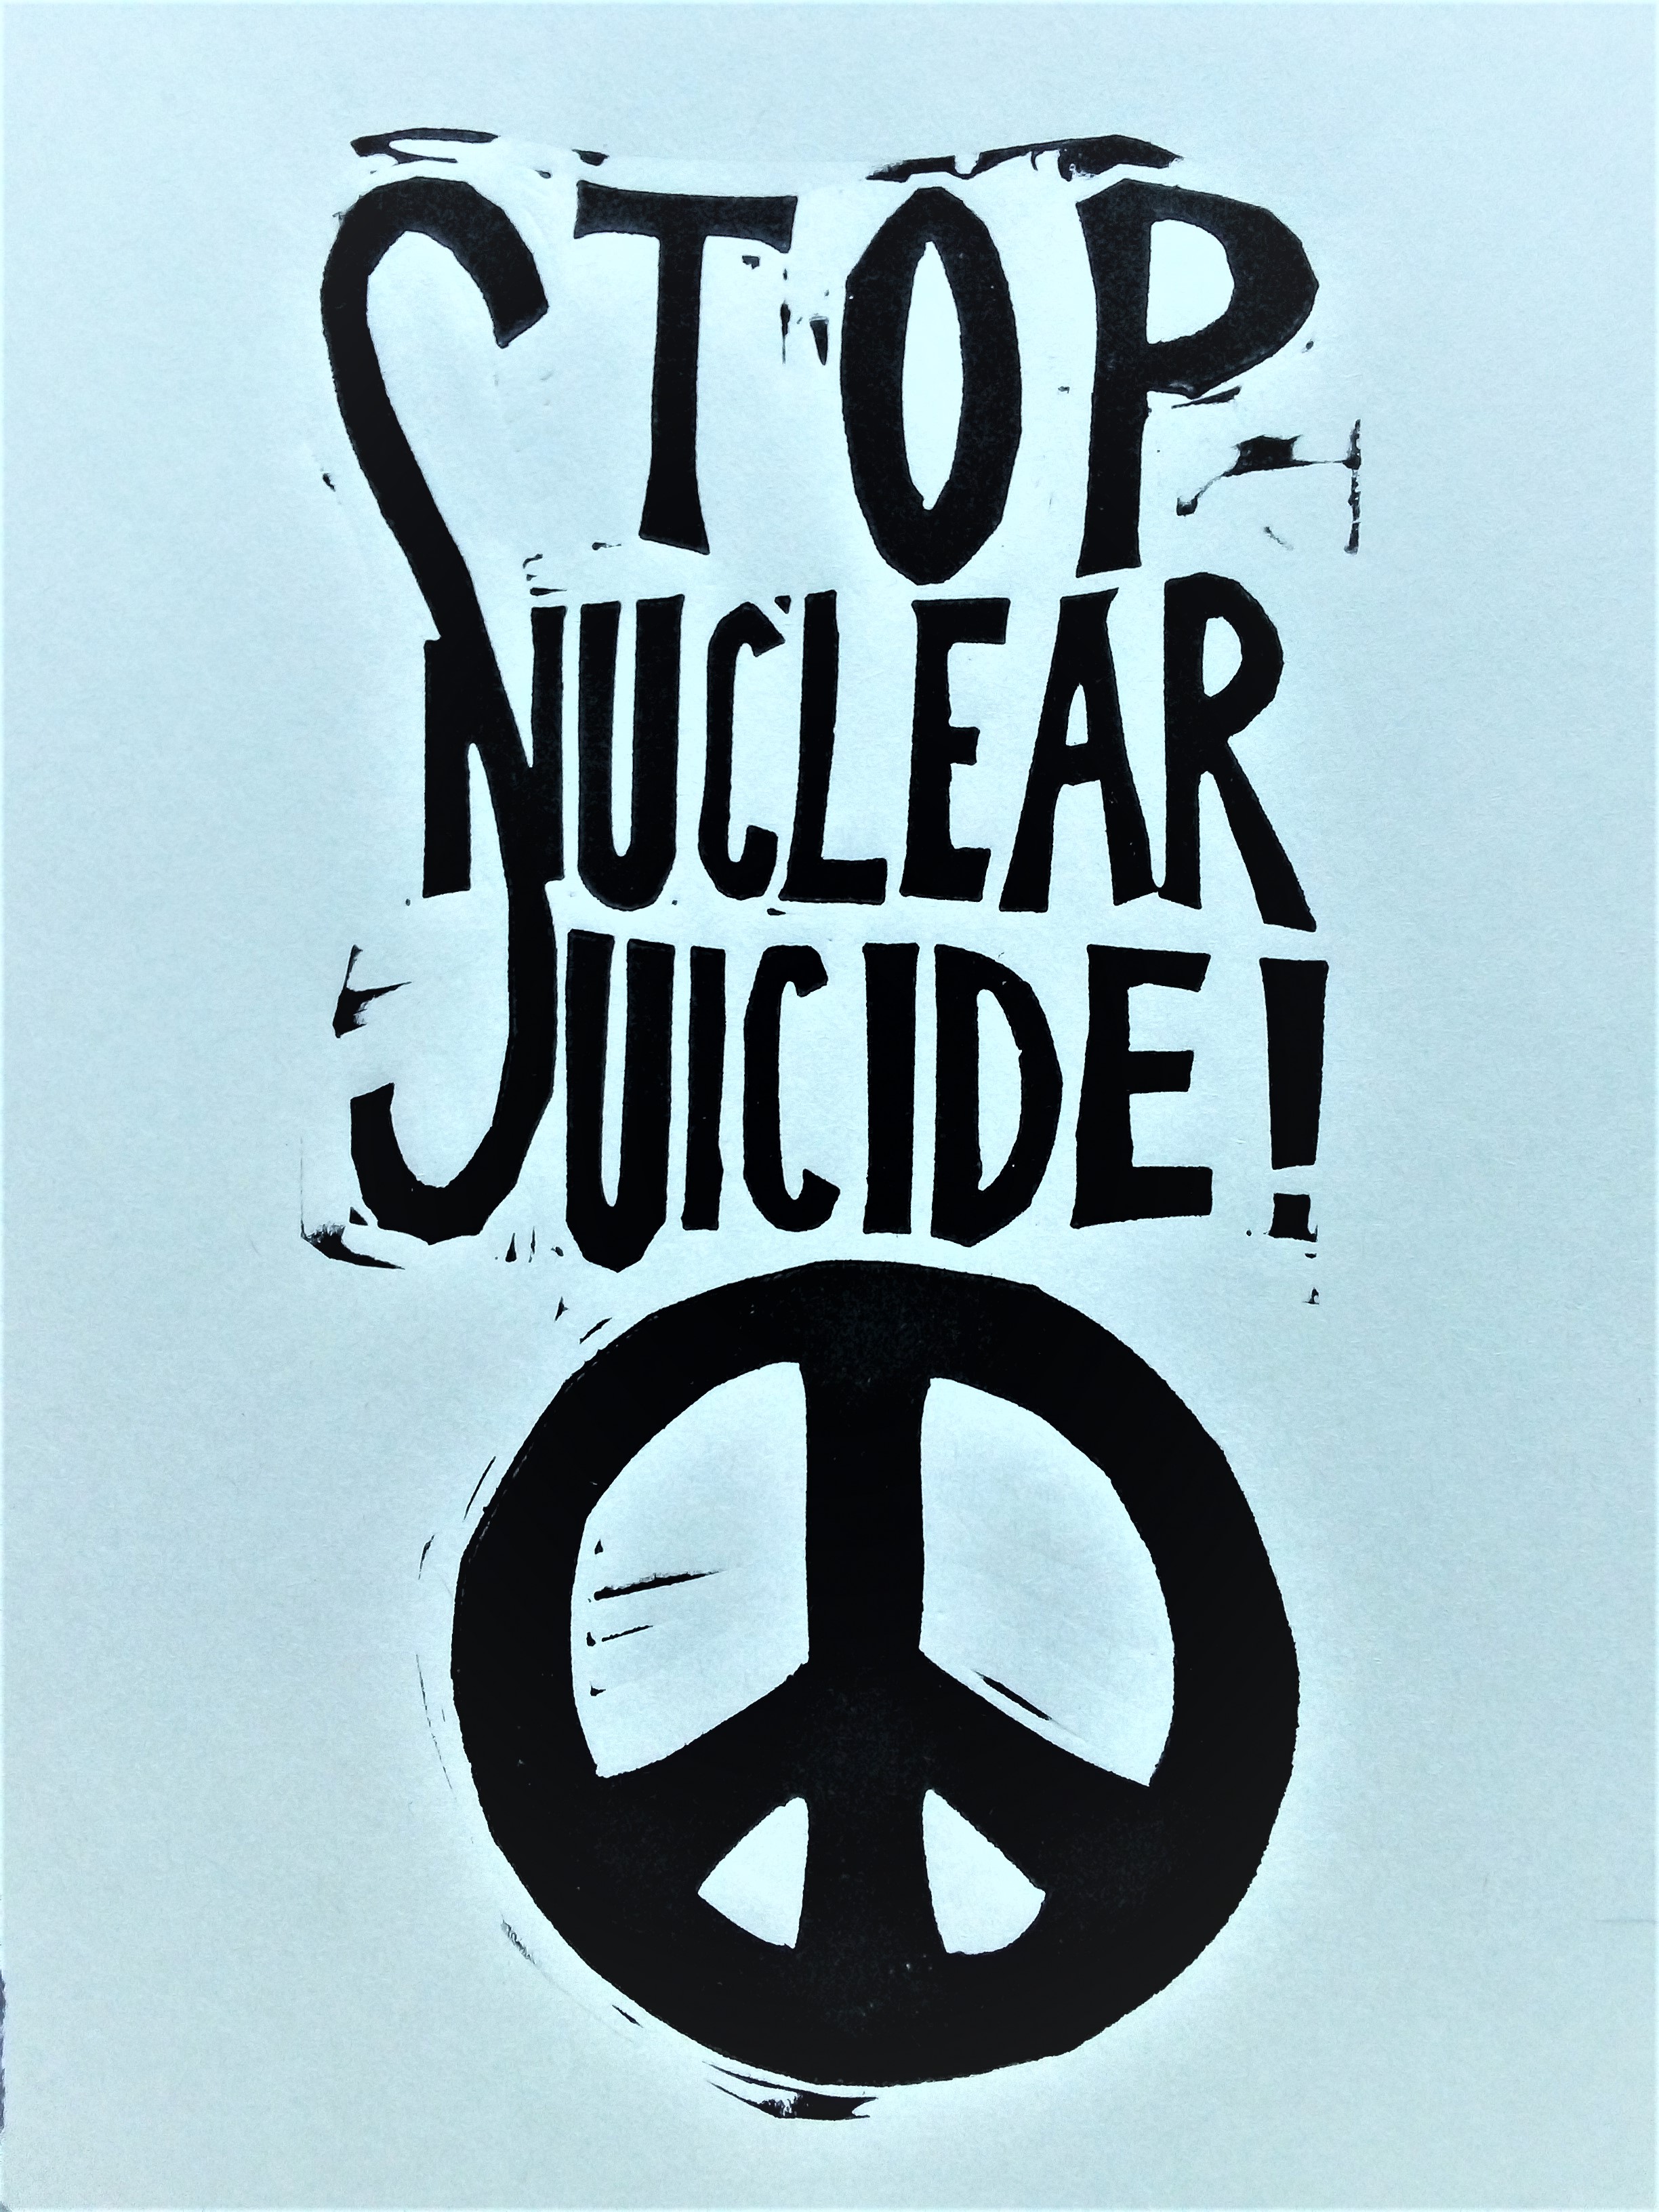 STOP_NUCLEAR_SUICIDE!.jpg